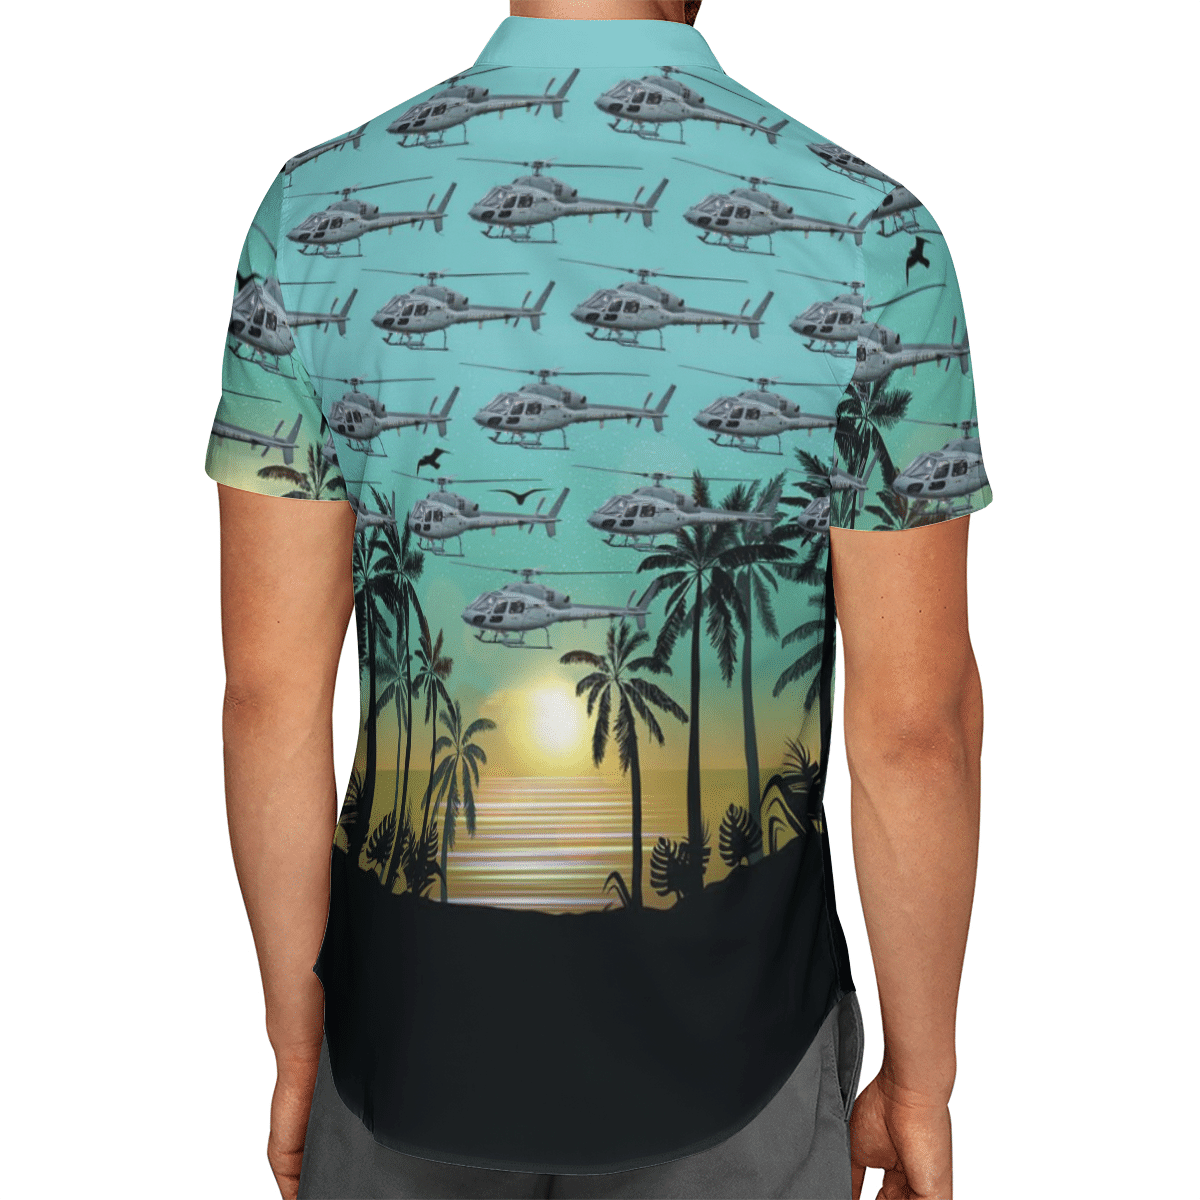 Going to the beach with a quality shirt 7